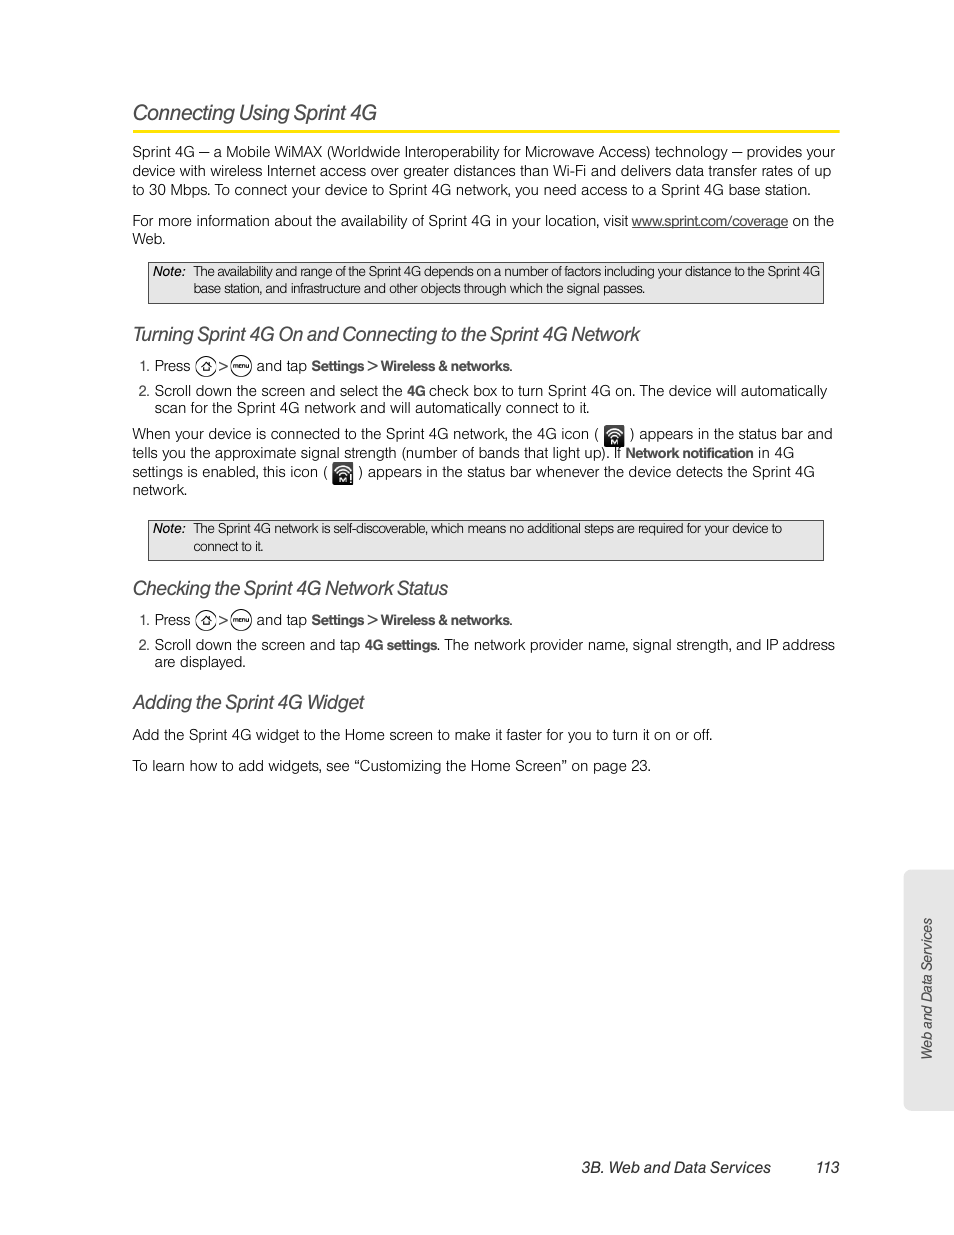 Connecting using sprint 4g, Checking the sprint 4g network status, Adding the sprint 4g widget | Sprint 4g (see “connecting using sprint 4g” for de | HTC EVO 4G User Manual | Page 123 / 197